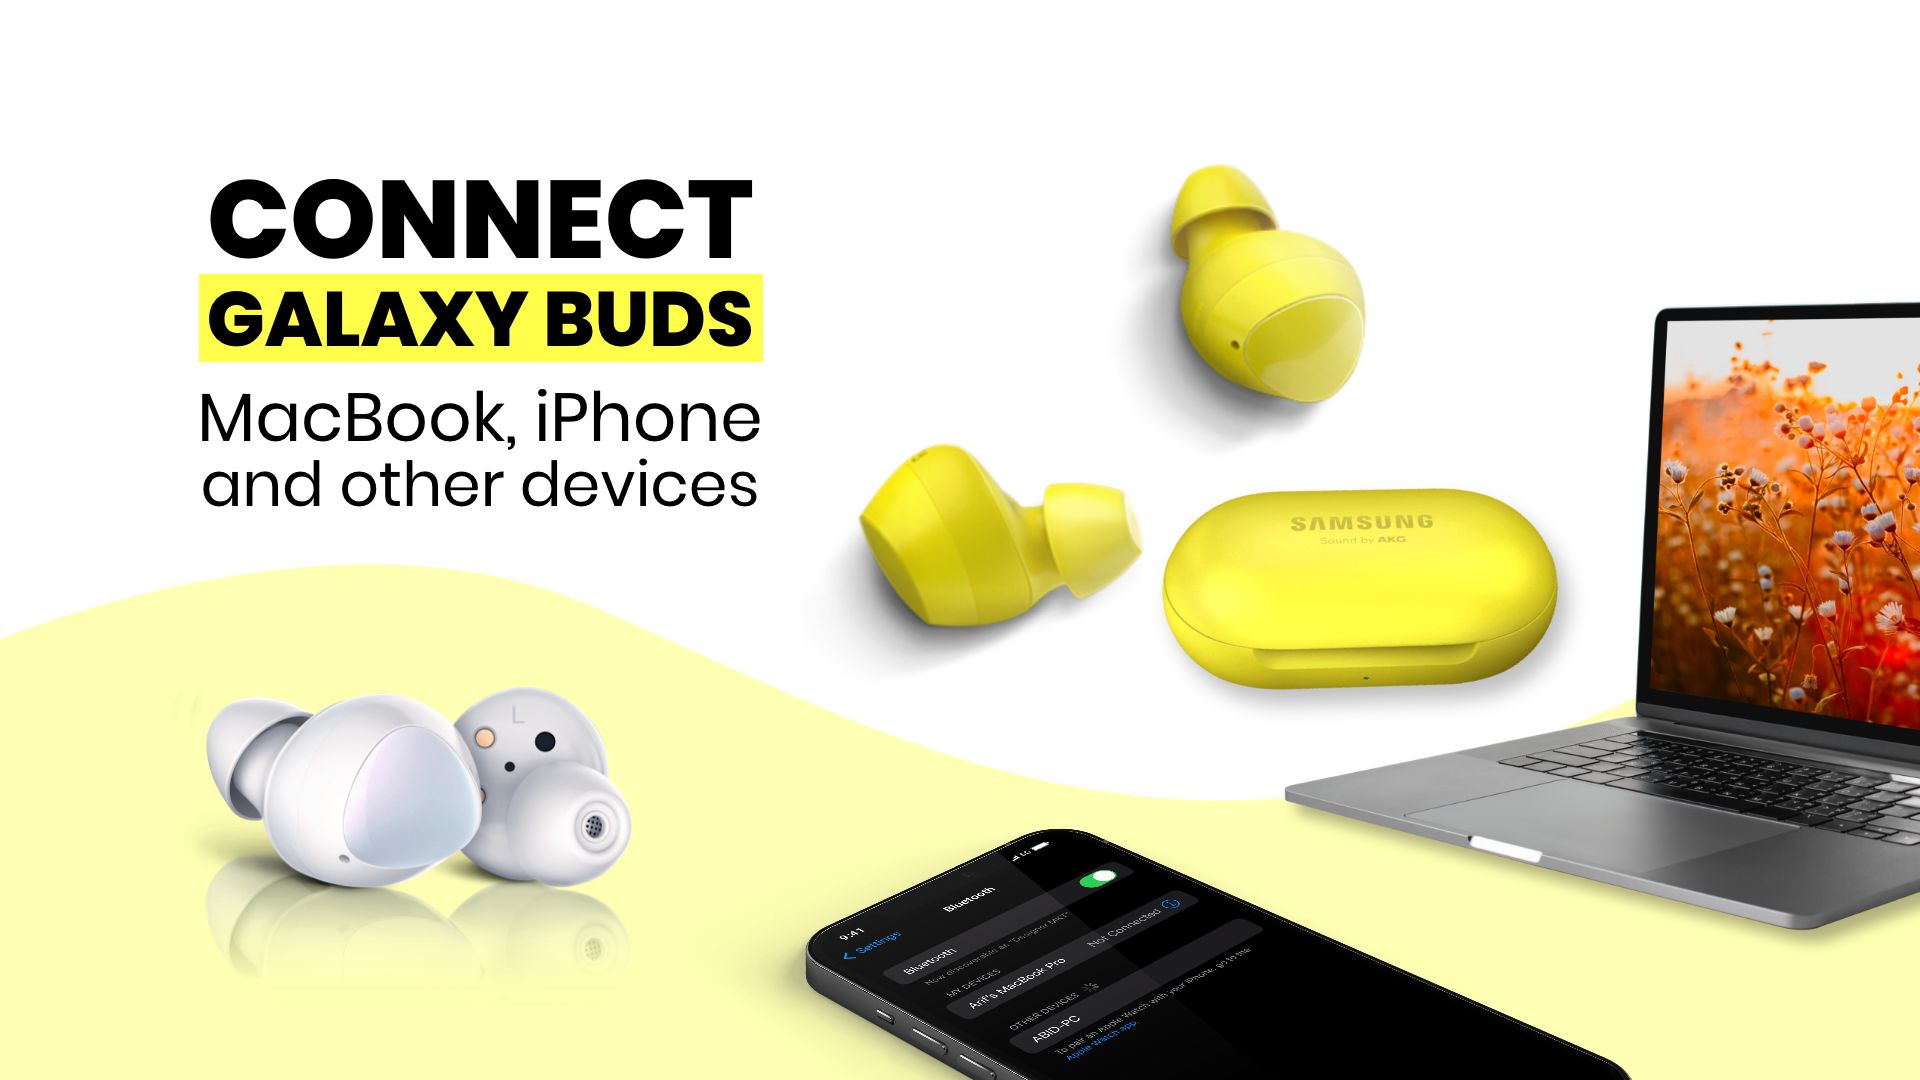 How to Connect Galaxy Buds to MacBook, iMac, laptop, or iPhone